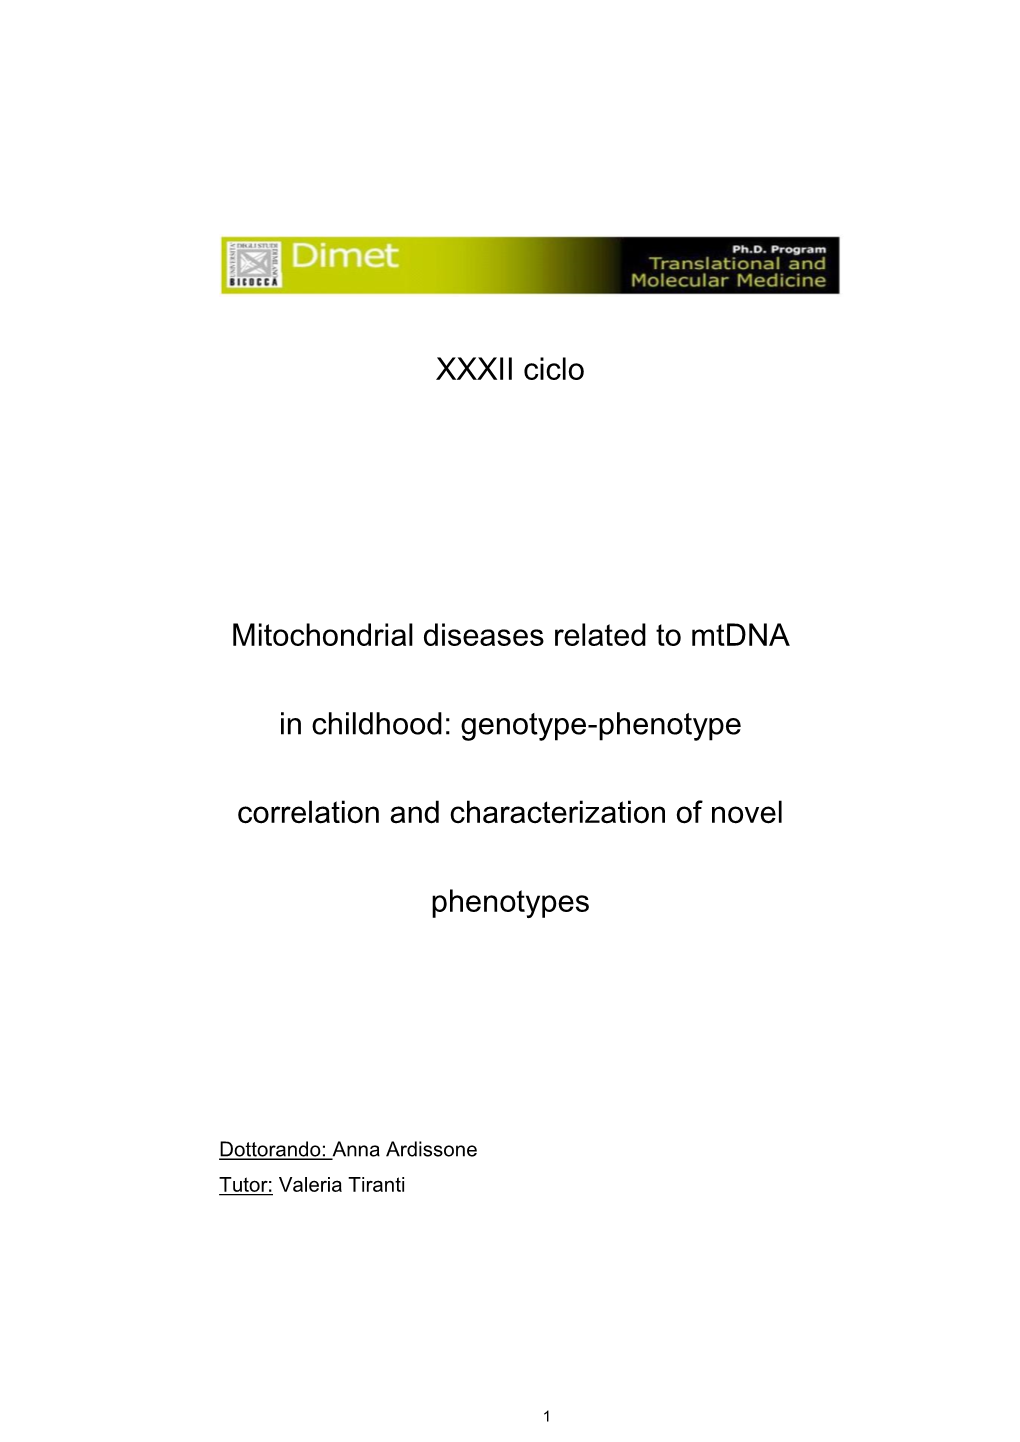 XXXII Ciclo Mitochondrial Diseases Related to Mtdna in Childhood